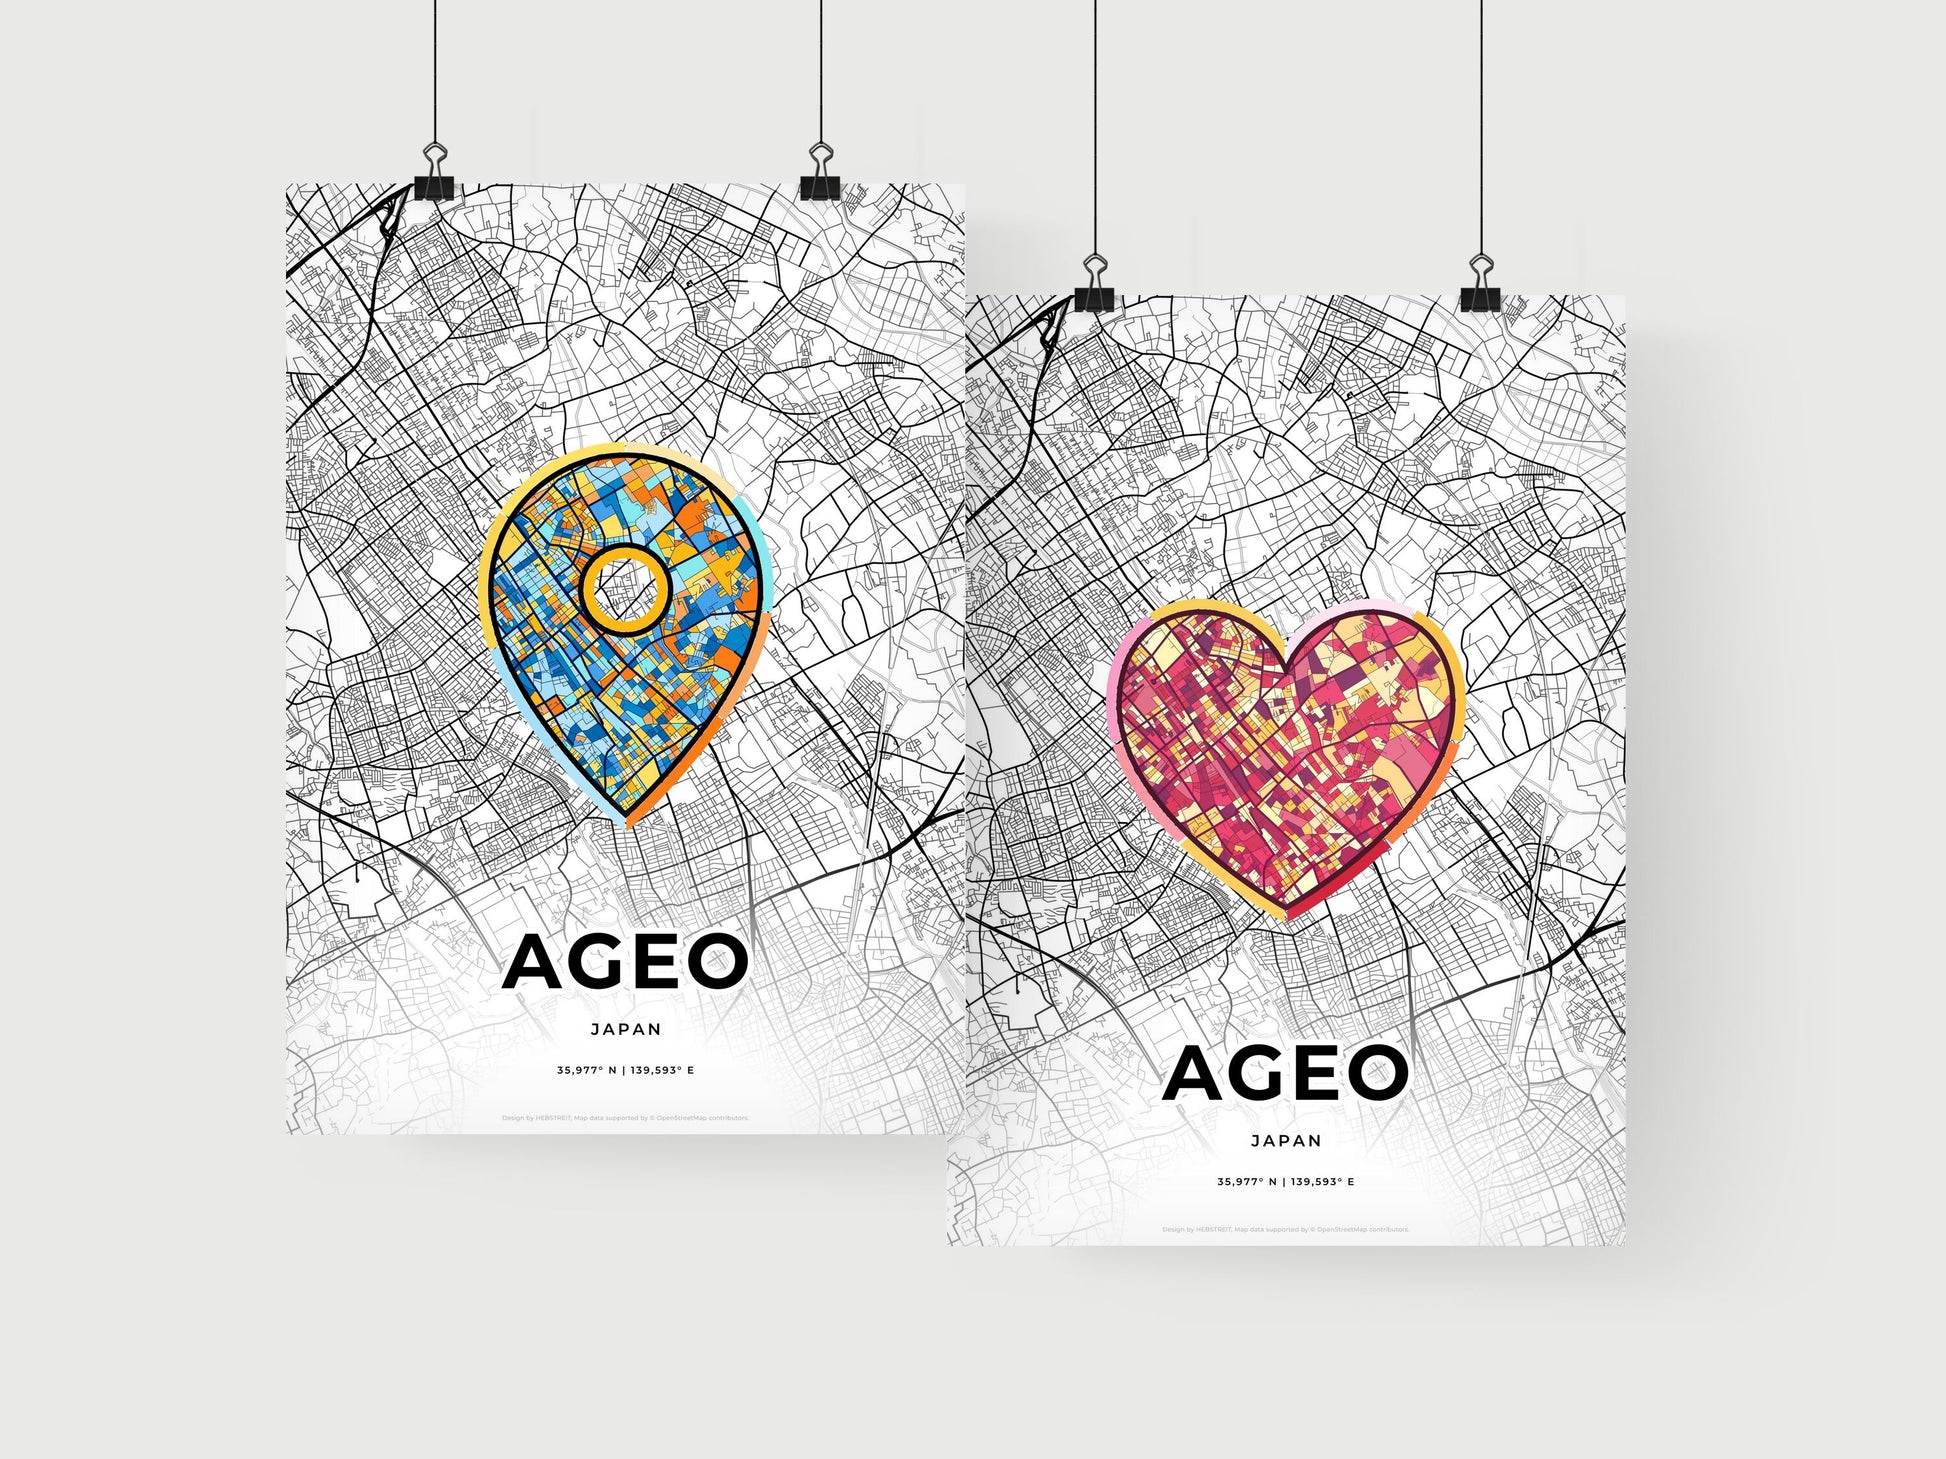 AGEO JAPAN minimal art map with a colorful icon. Where it all began, Couple map gift.